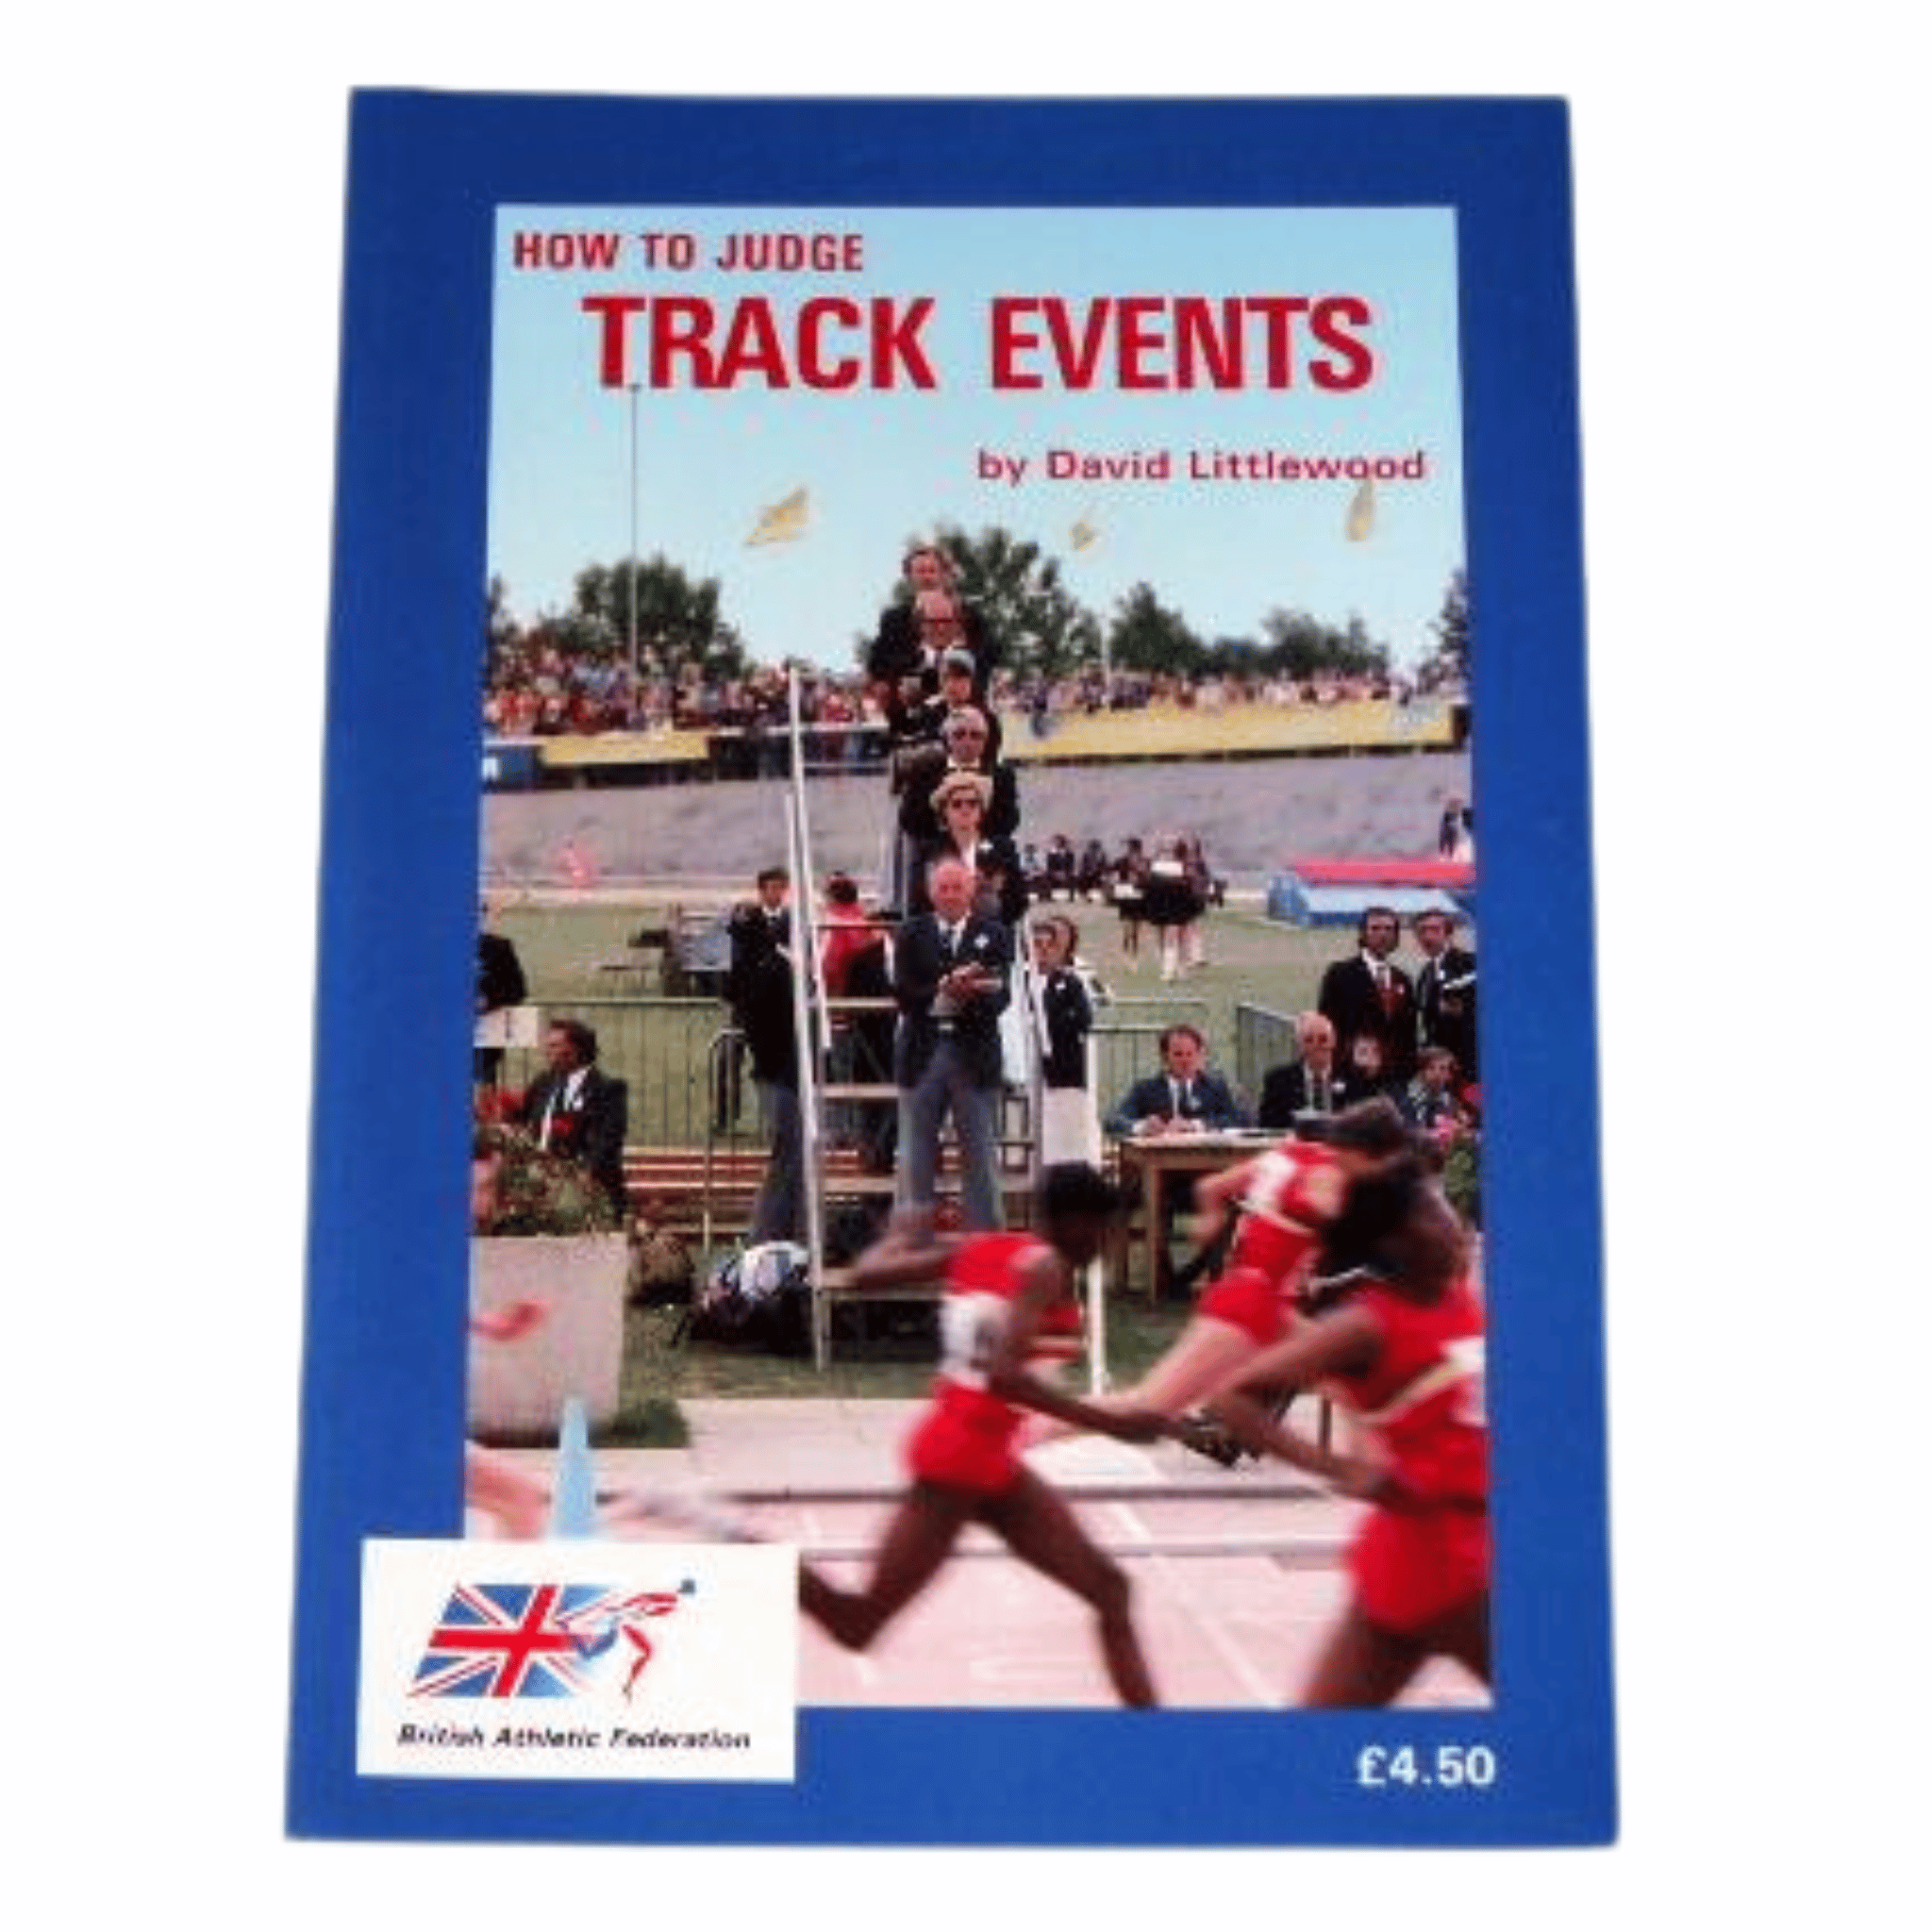 How to Judge Track Events | Book by David Littlewood and British Athletics Federation